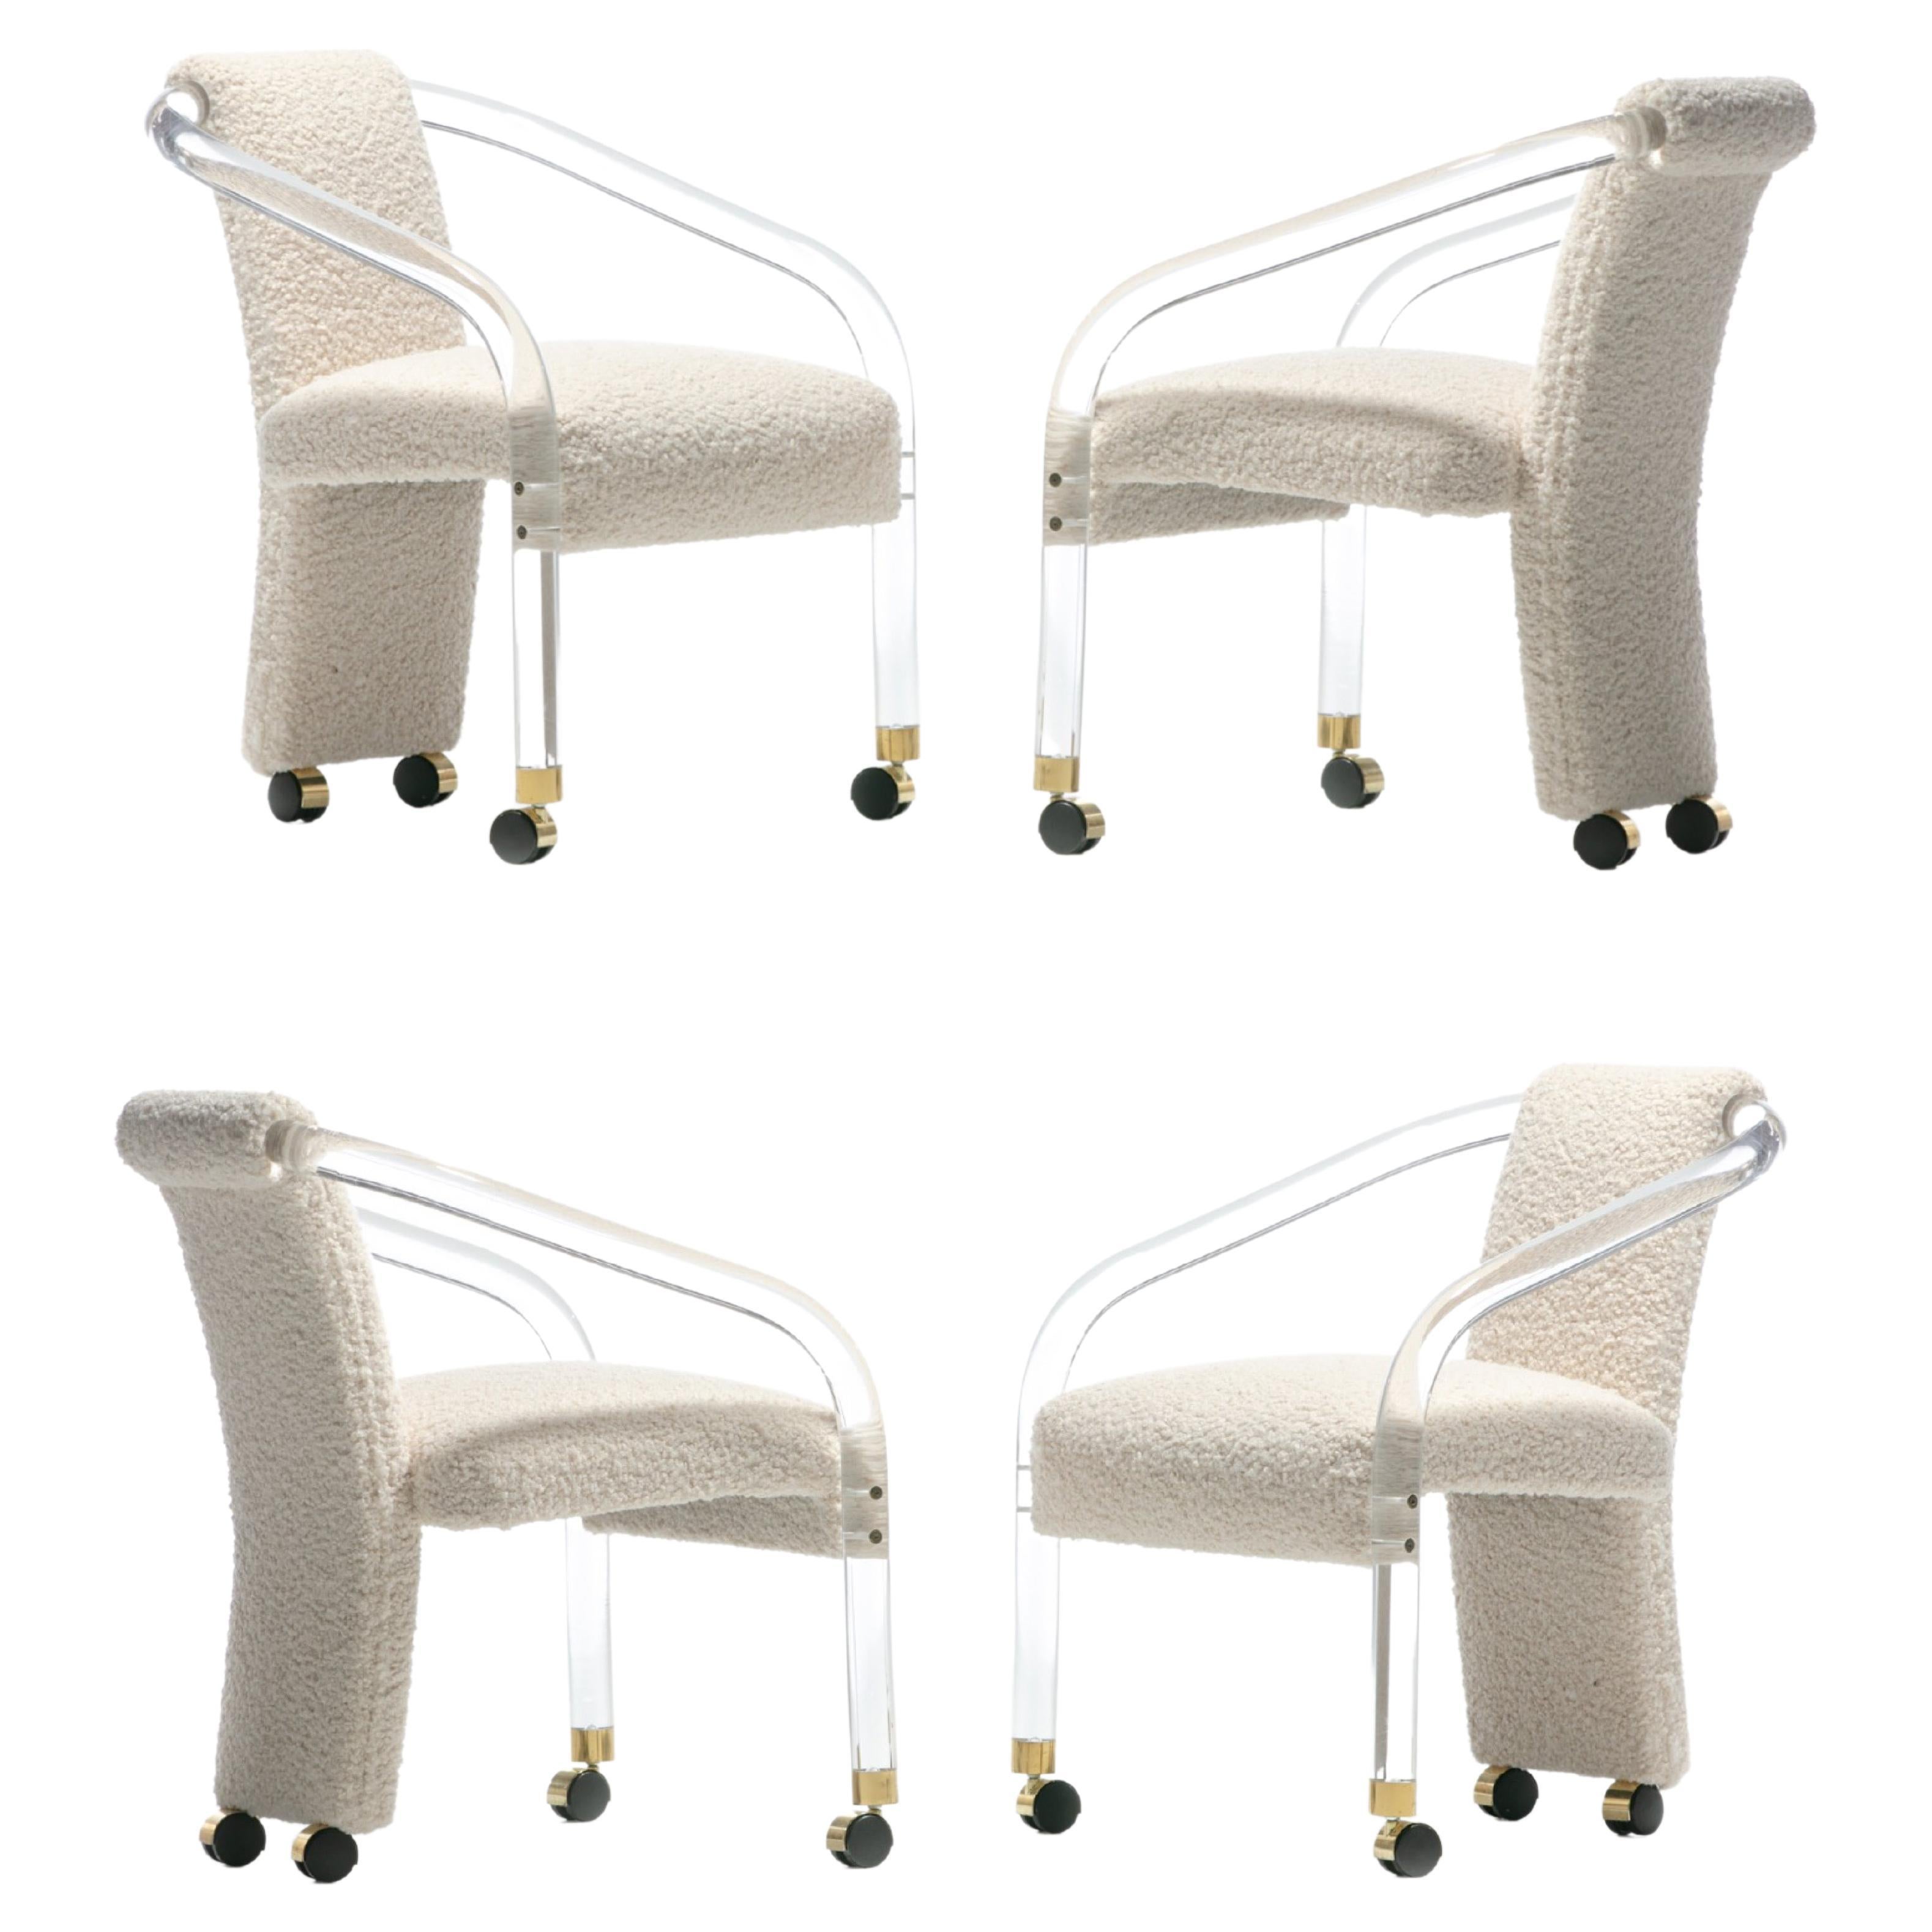 Sexy 1970s Lucite & Brass Set of Chairs in Ivory White Bouclé on Casters c. 1970